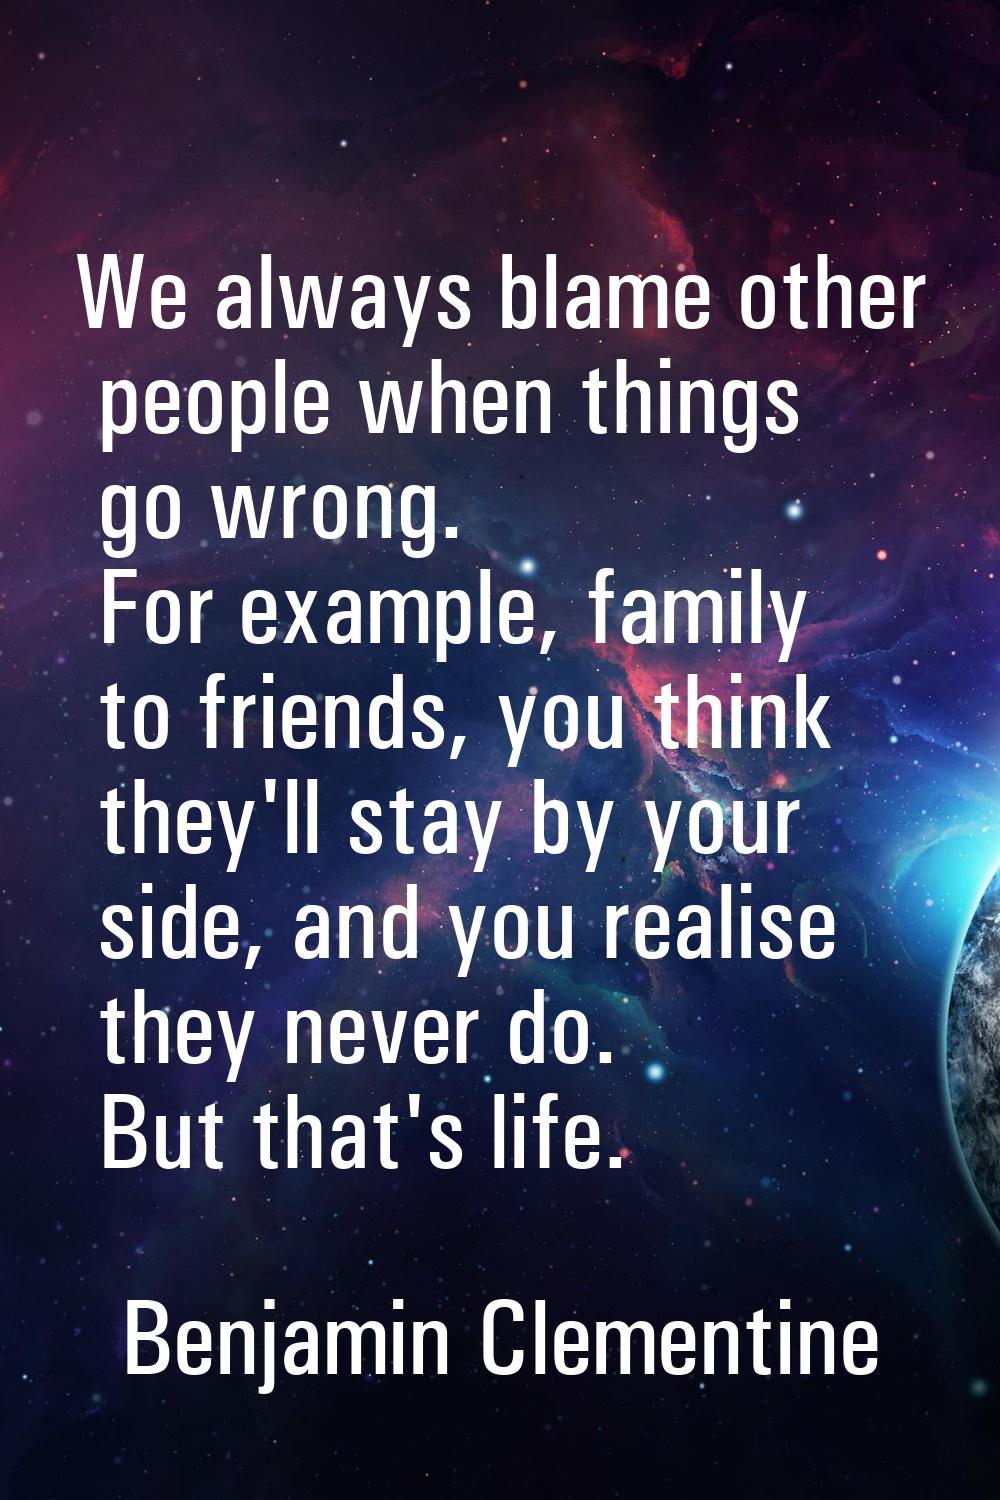 We always blame other people when things go wrong. For example, family to friends, you think they'l